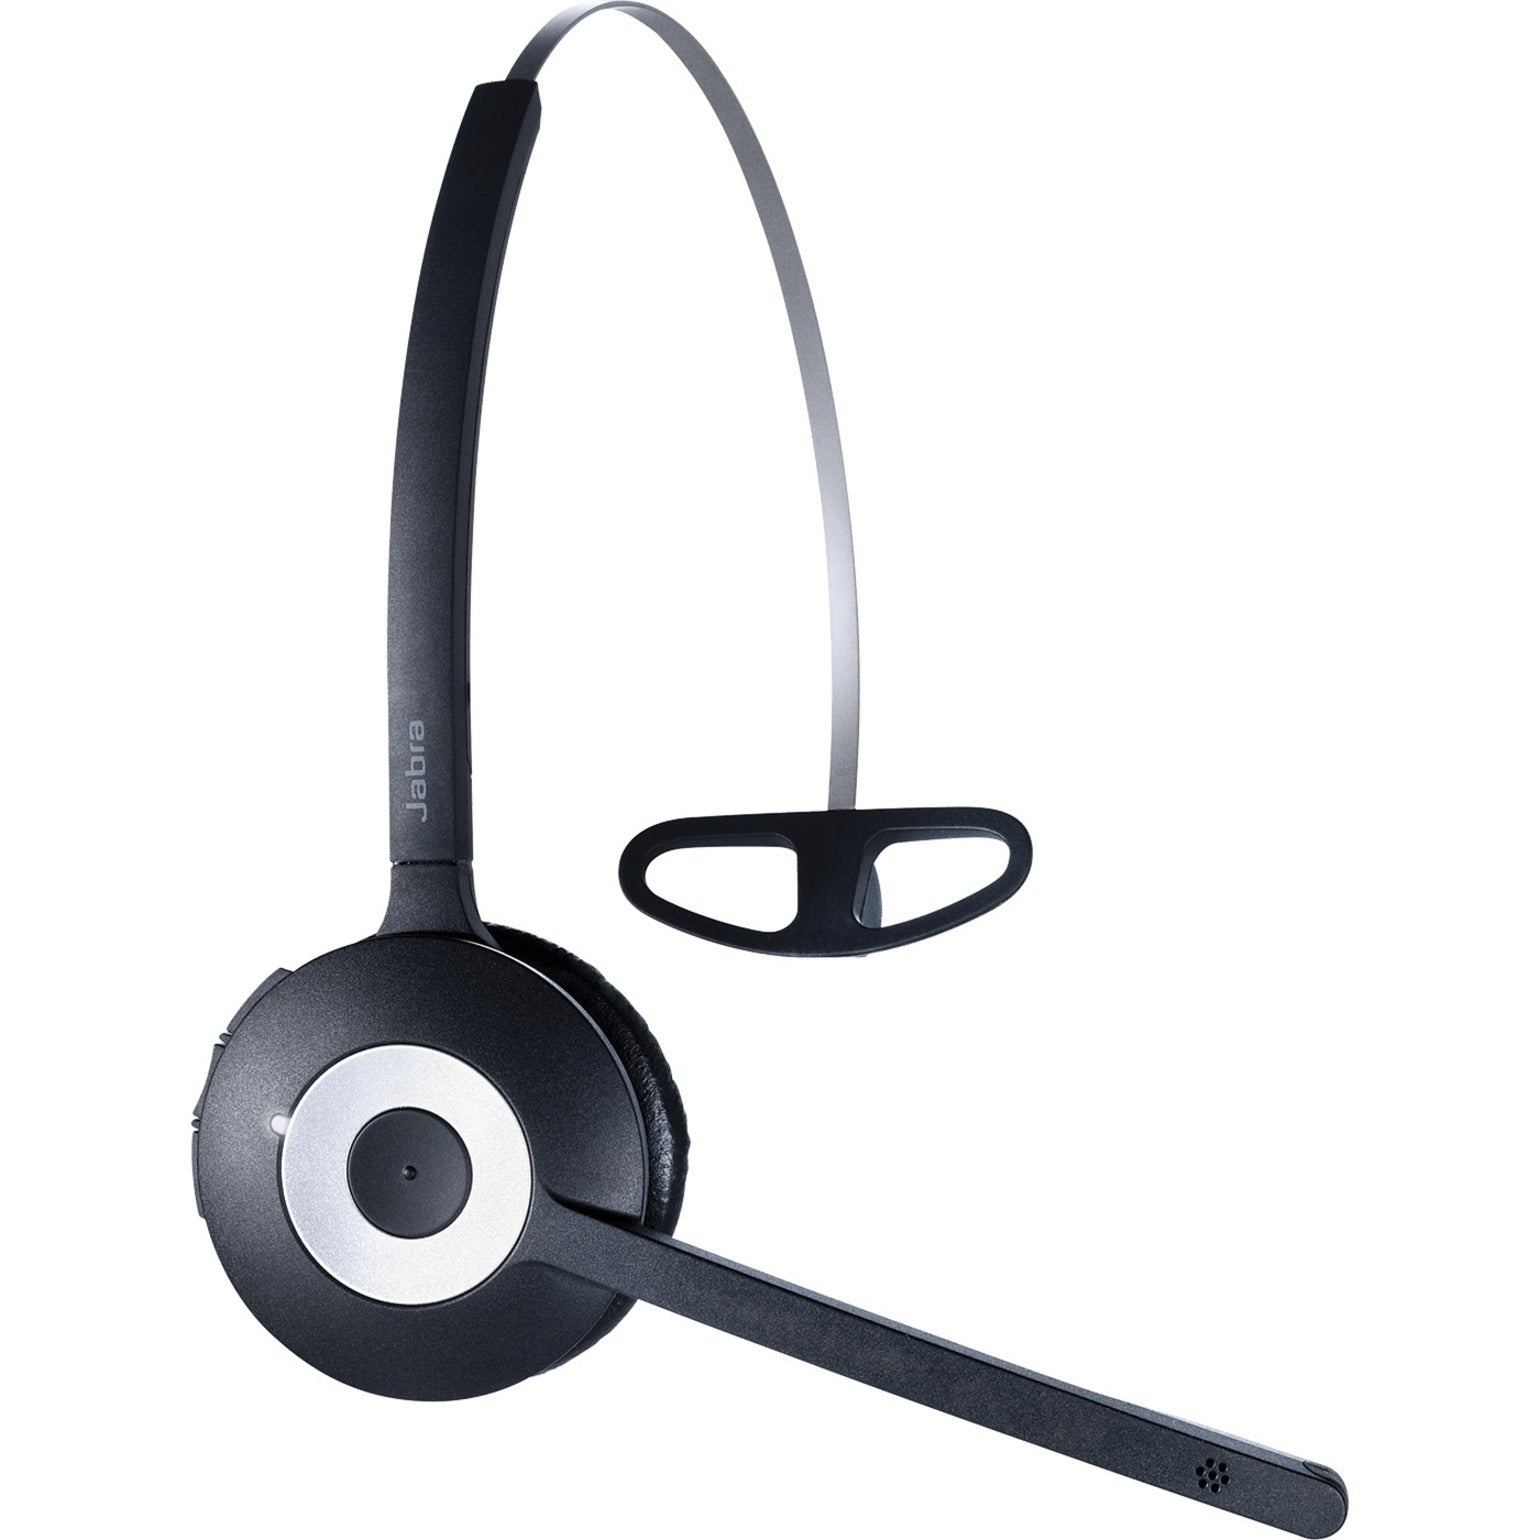 Jabra 930-65-503-105 PRO 930 Headset, Wireless Mono Earpiece with Noise Cancelling Microphone